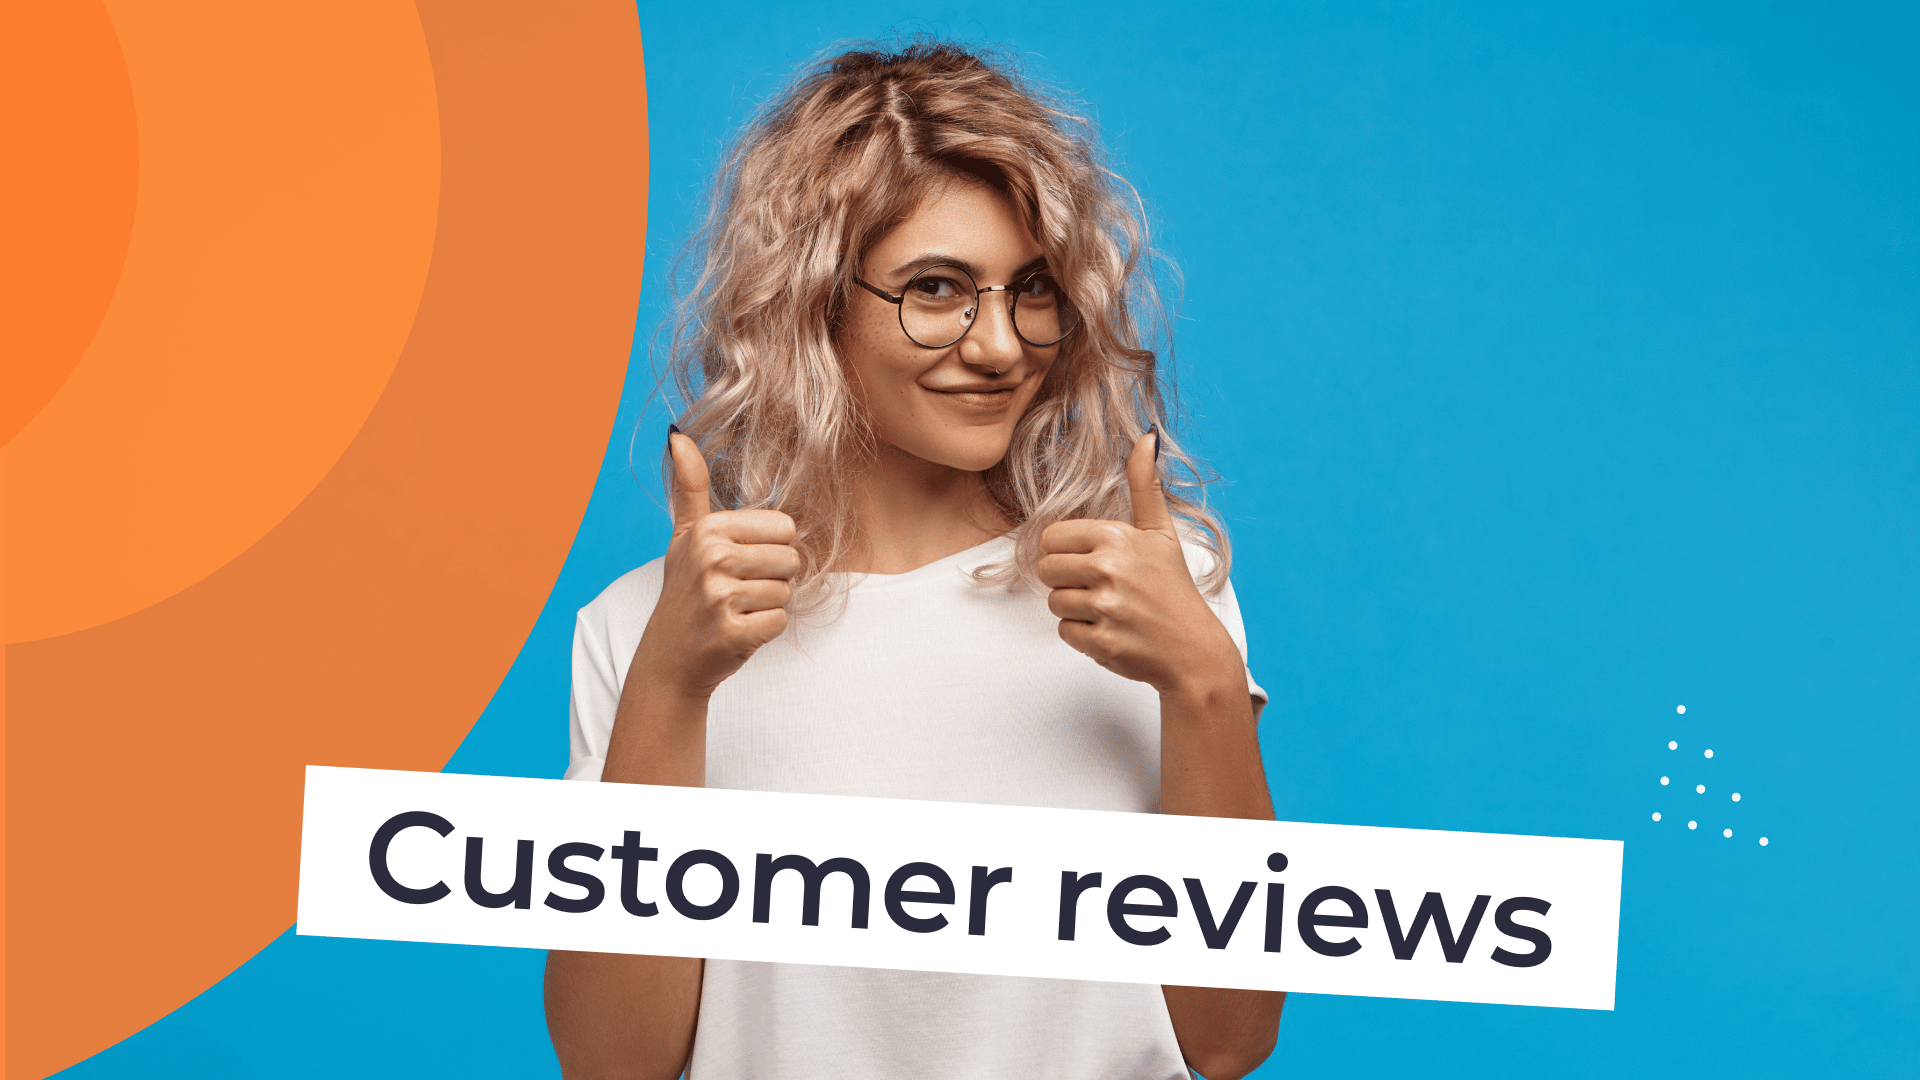 10 Ways Customer Reviews Can Enrich Your Content